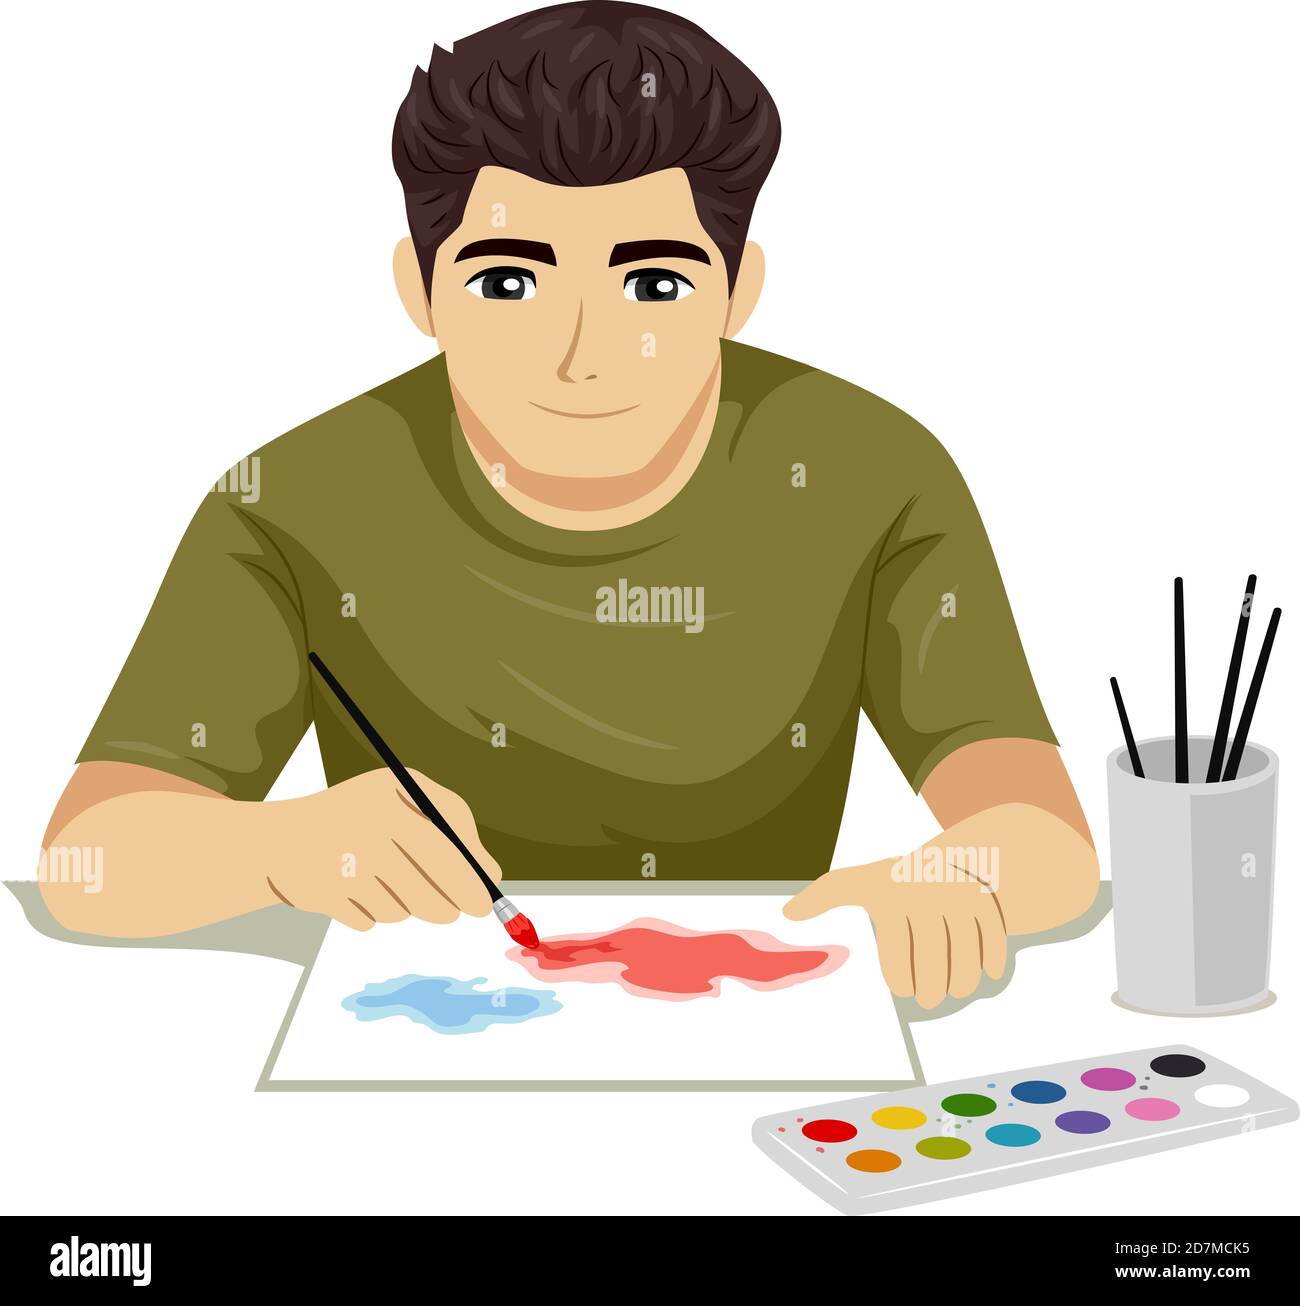 Illustration of a Teenage Guy Holding Brush Making Watercolor Painting Stock Photo